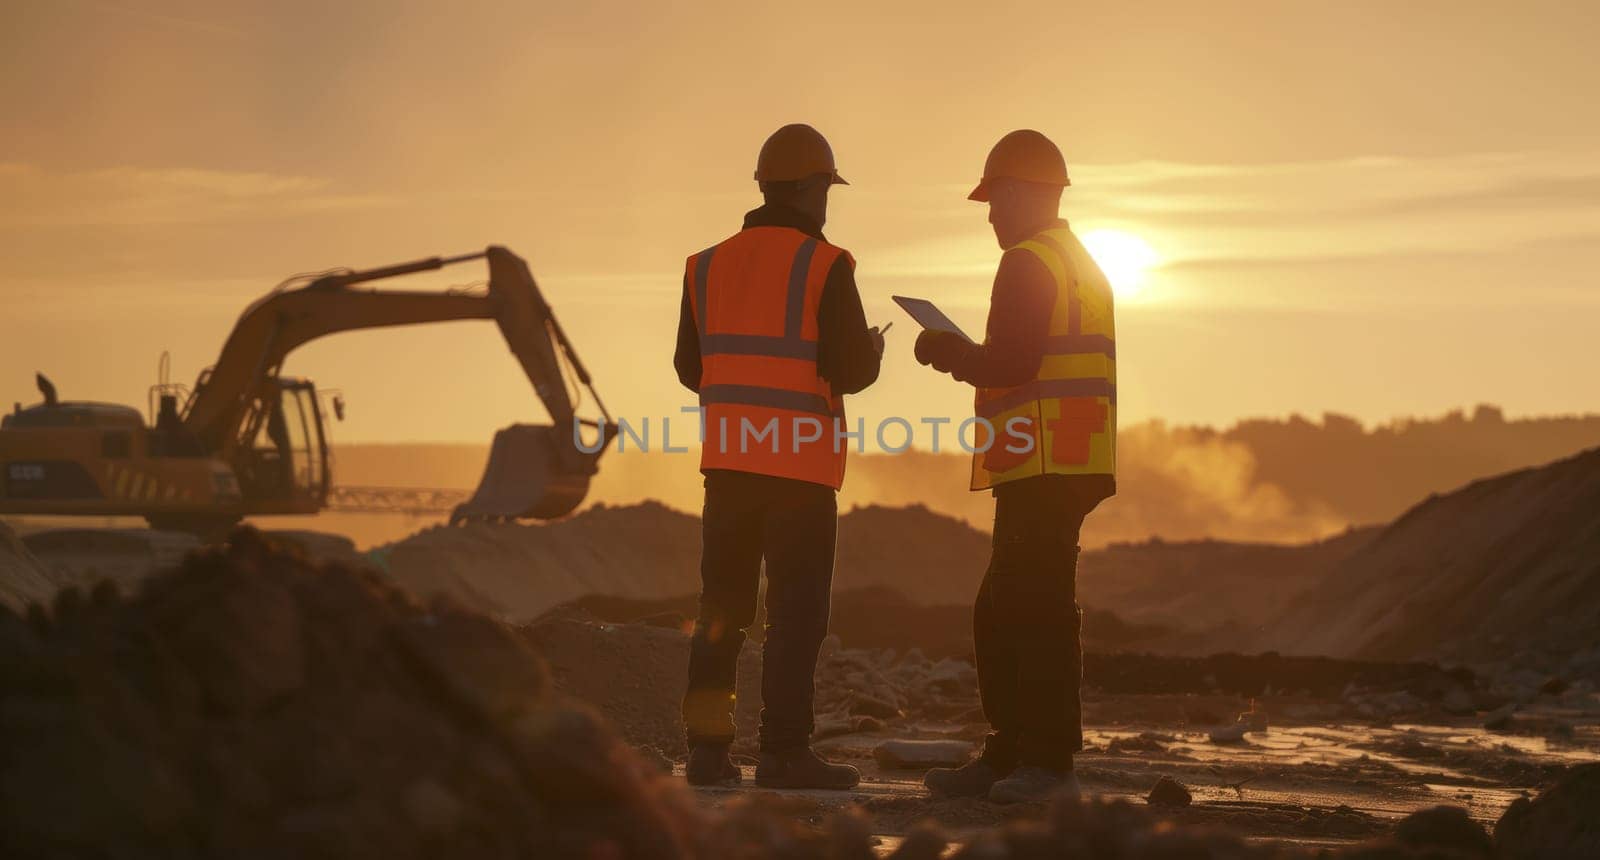 Two construction workers are enjoying the sunset on a construction site, admiring the beautiful sky and landscape while looking at a tablet